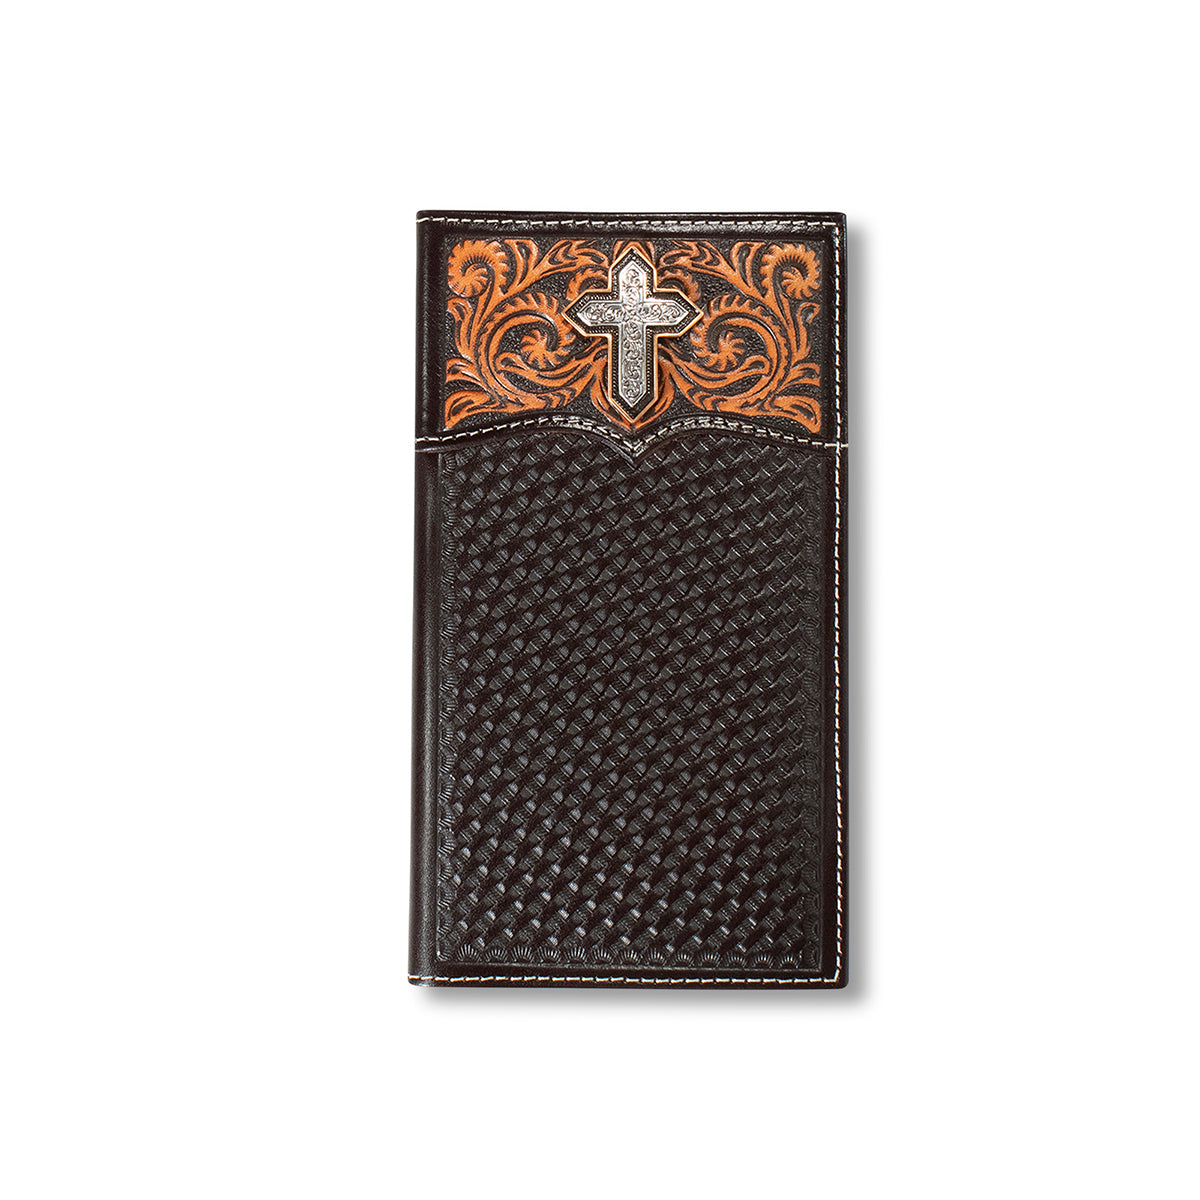 Ariat Men's Rodeo Cross Floral Filigree Wallet STYLE A3557244